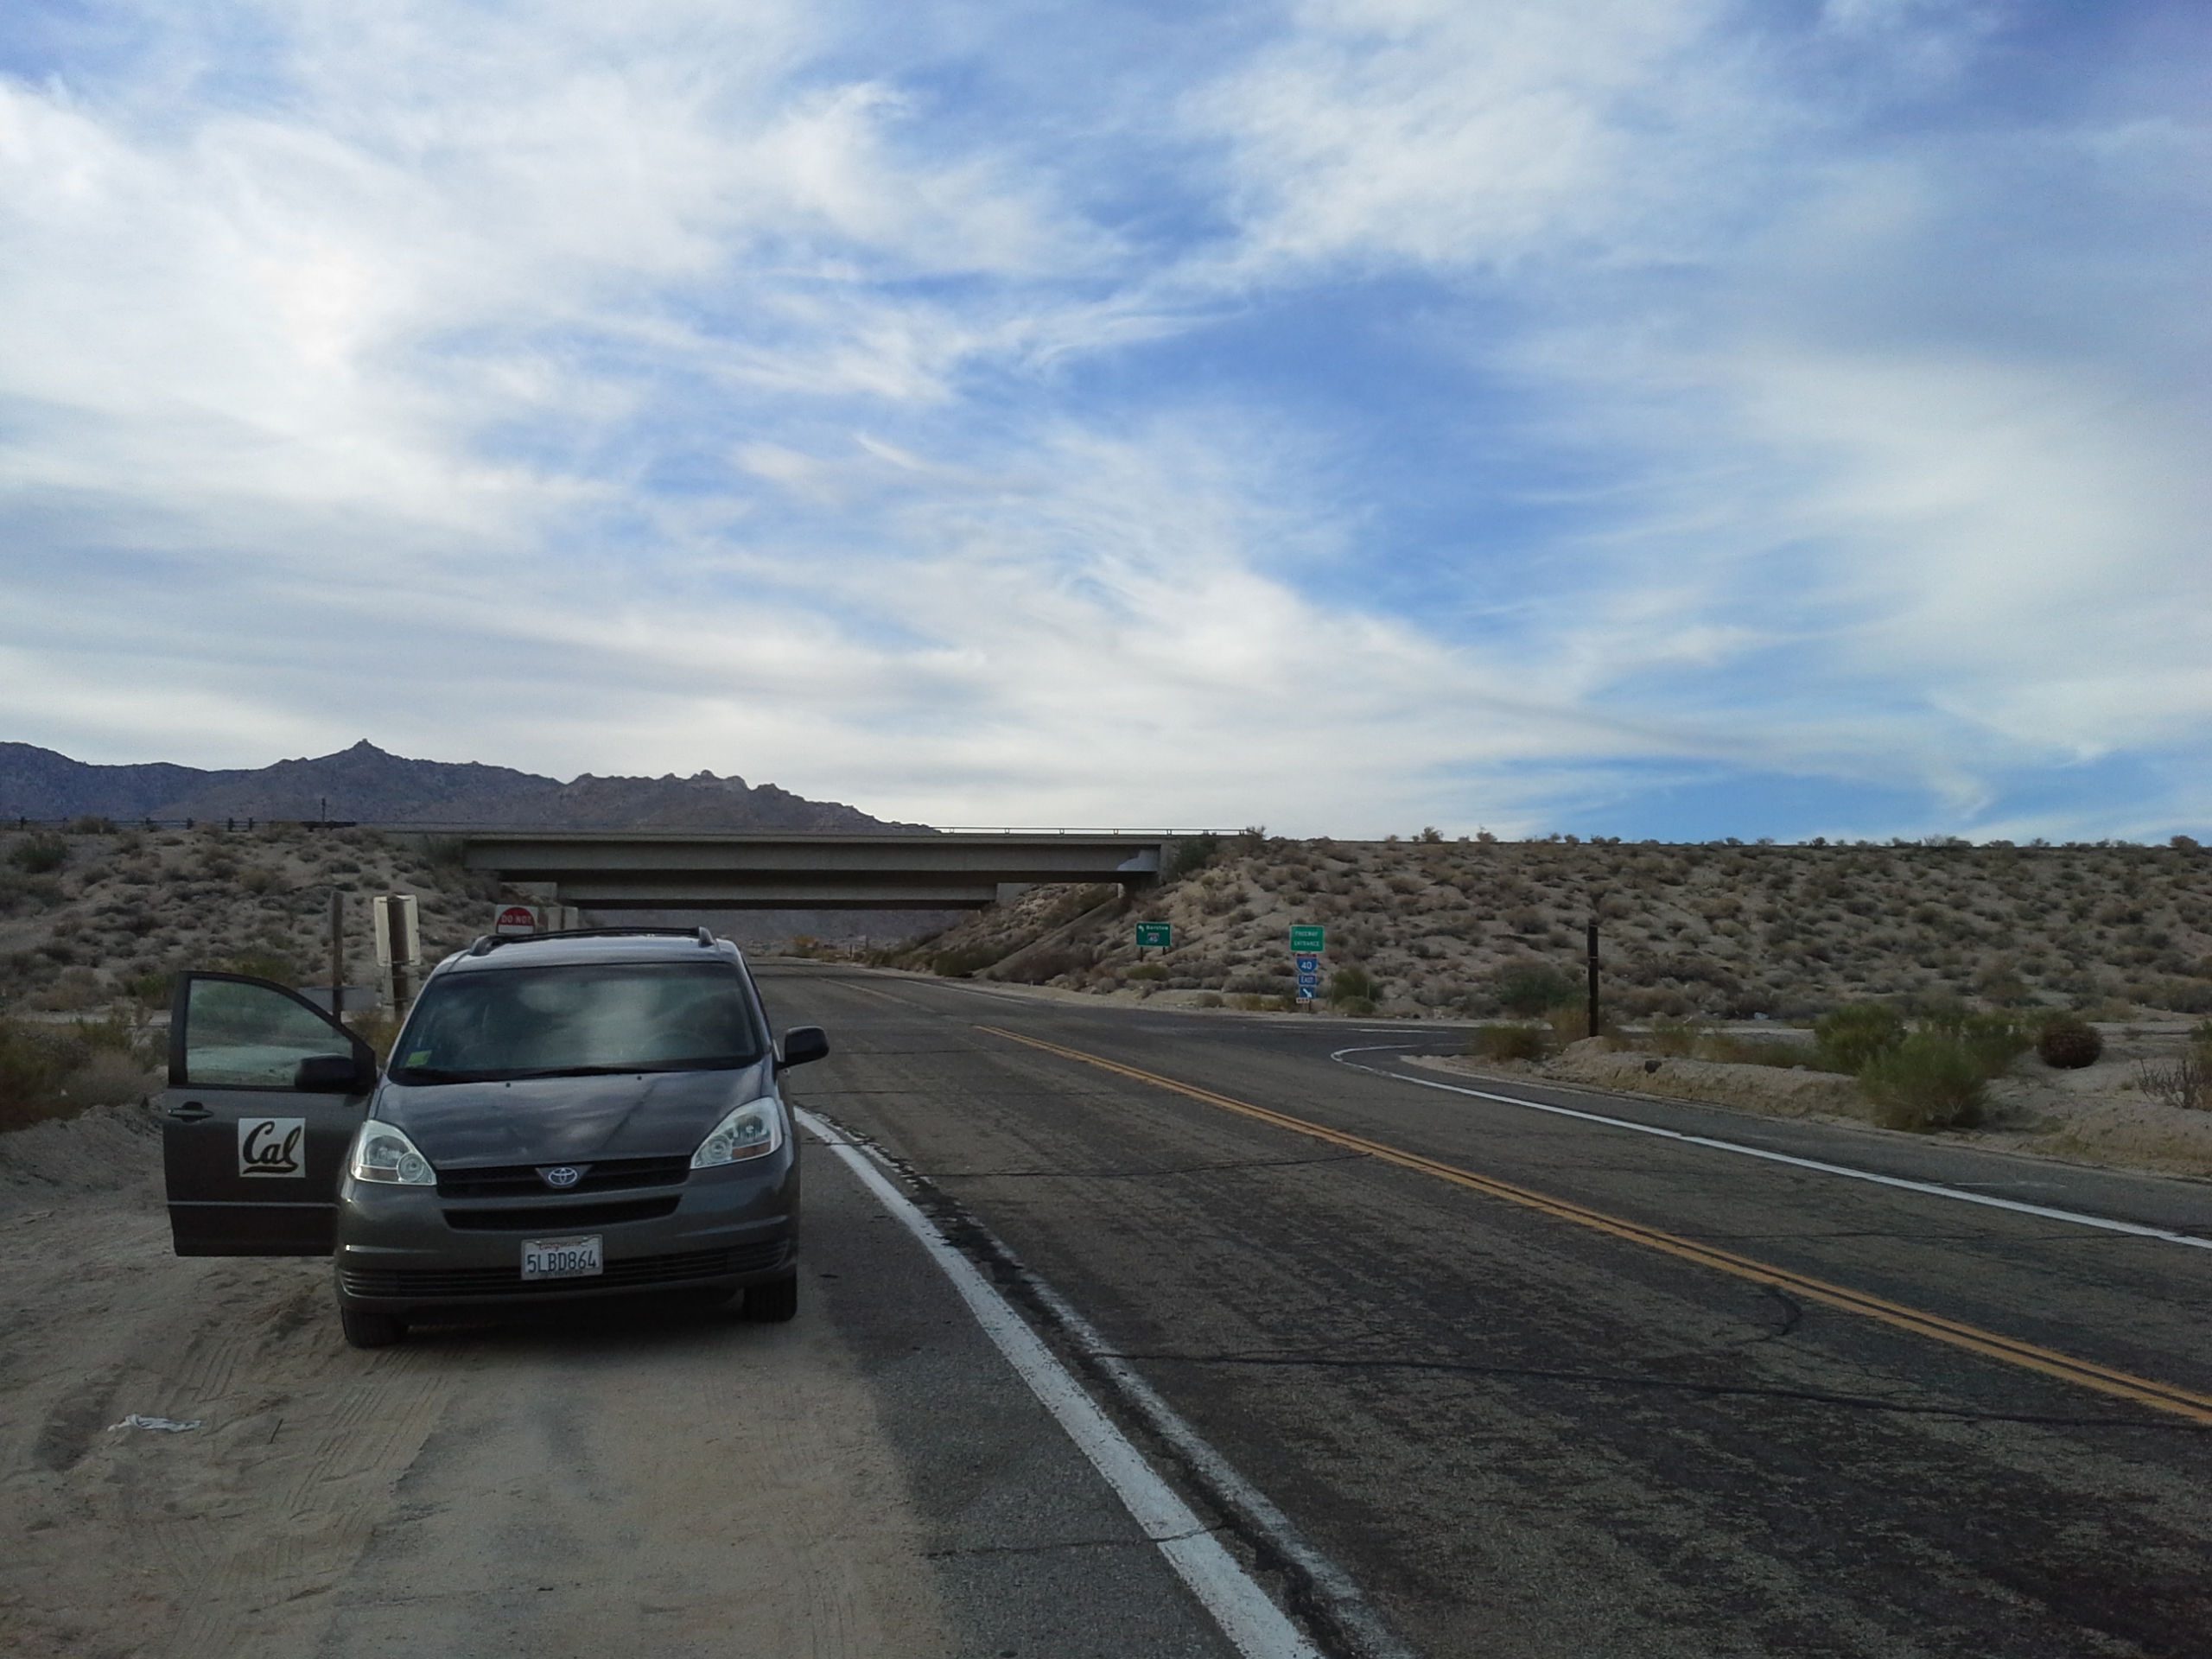 The rather picturesque spot in the Mojave Desert where the trailer's wheel blew out